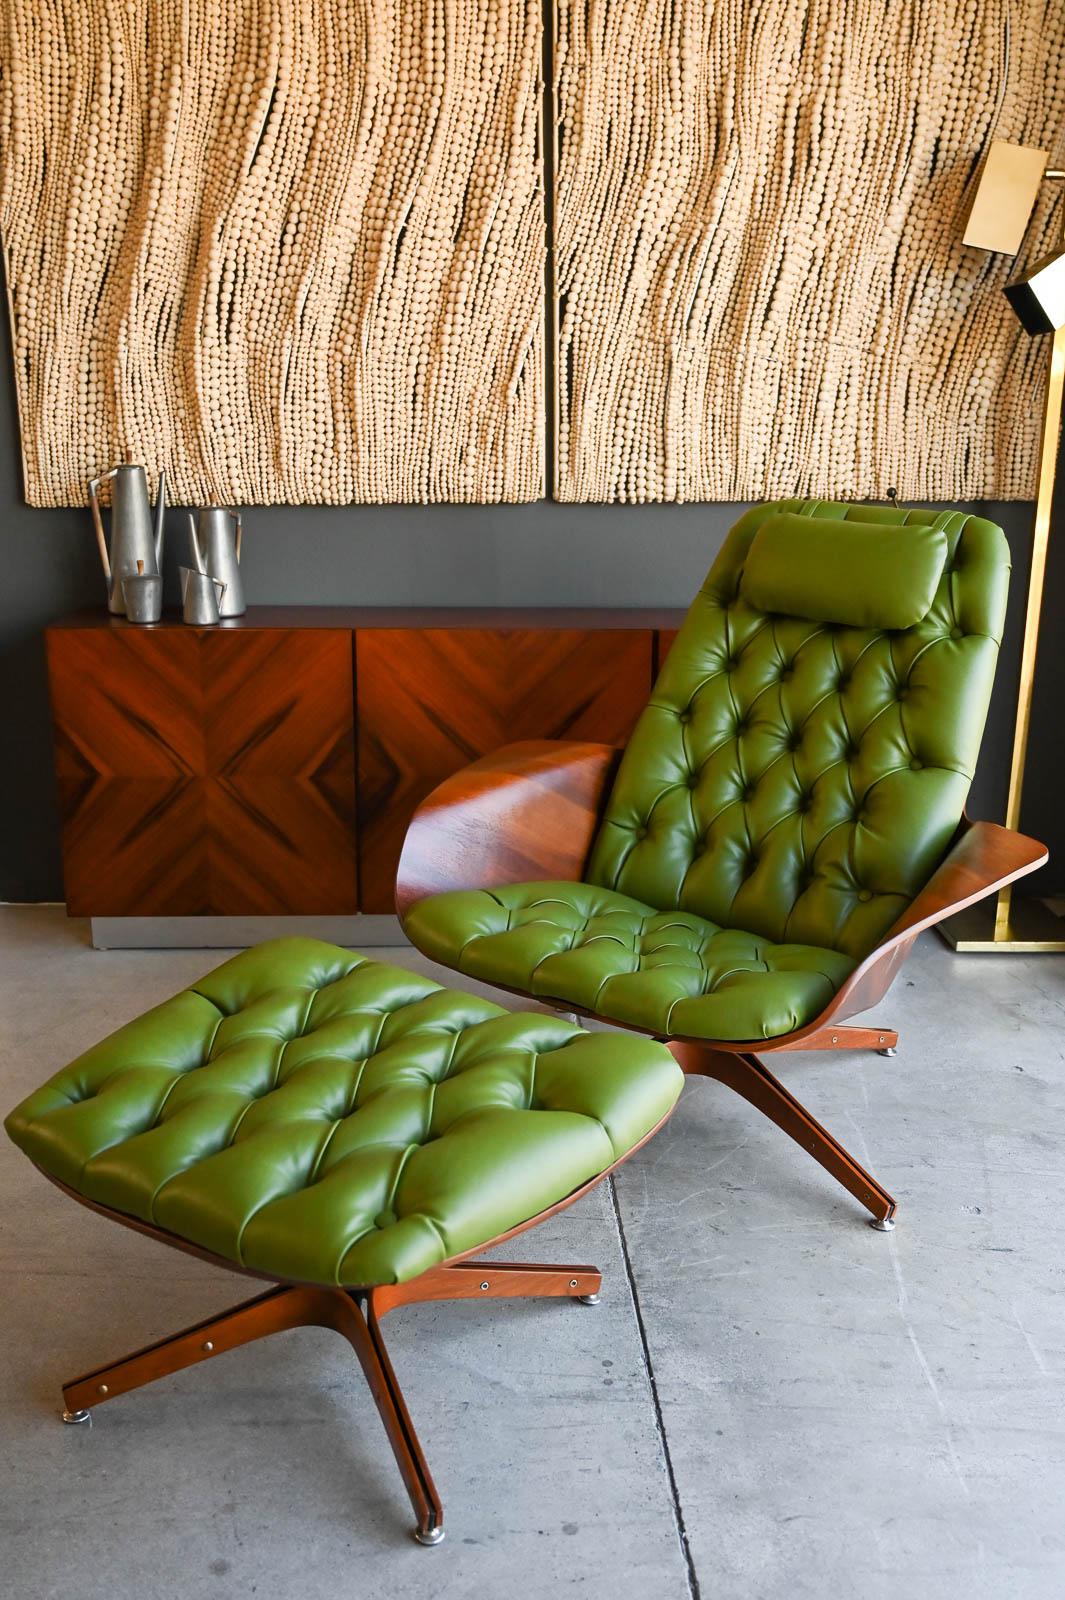 Mr. Chair with ottoman by George Mulhauser for Plycraft, ca. 1960. Professionally restored walnut veneer with beautiful avocado green upholstery with new foam. Restored from the frame up and in showroom condition. This rare and hard to find set was